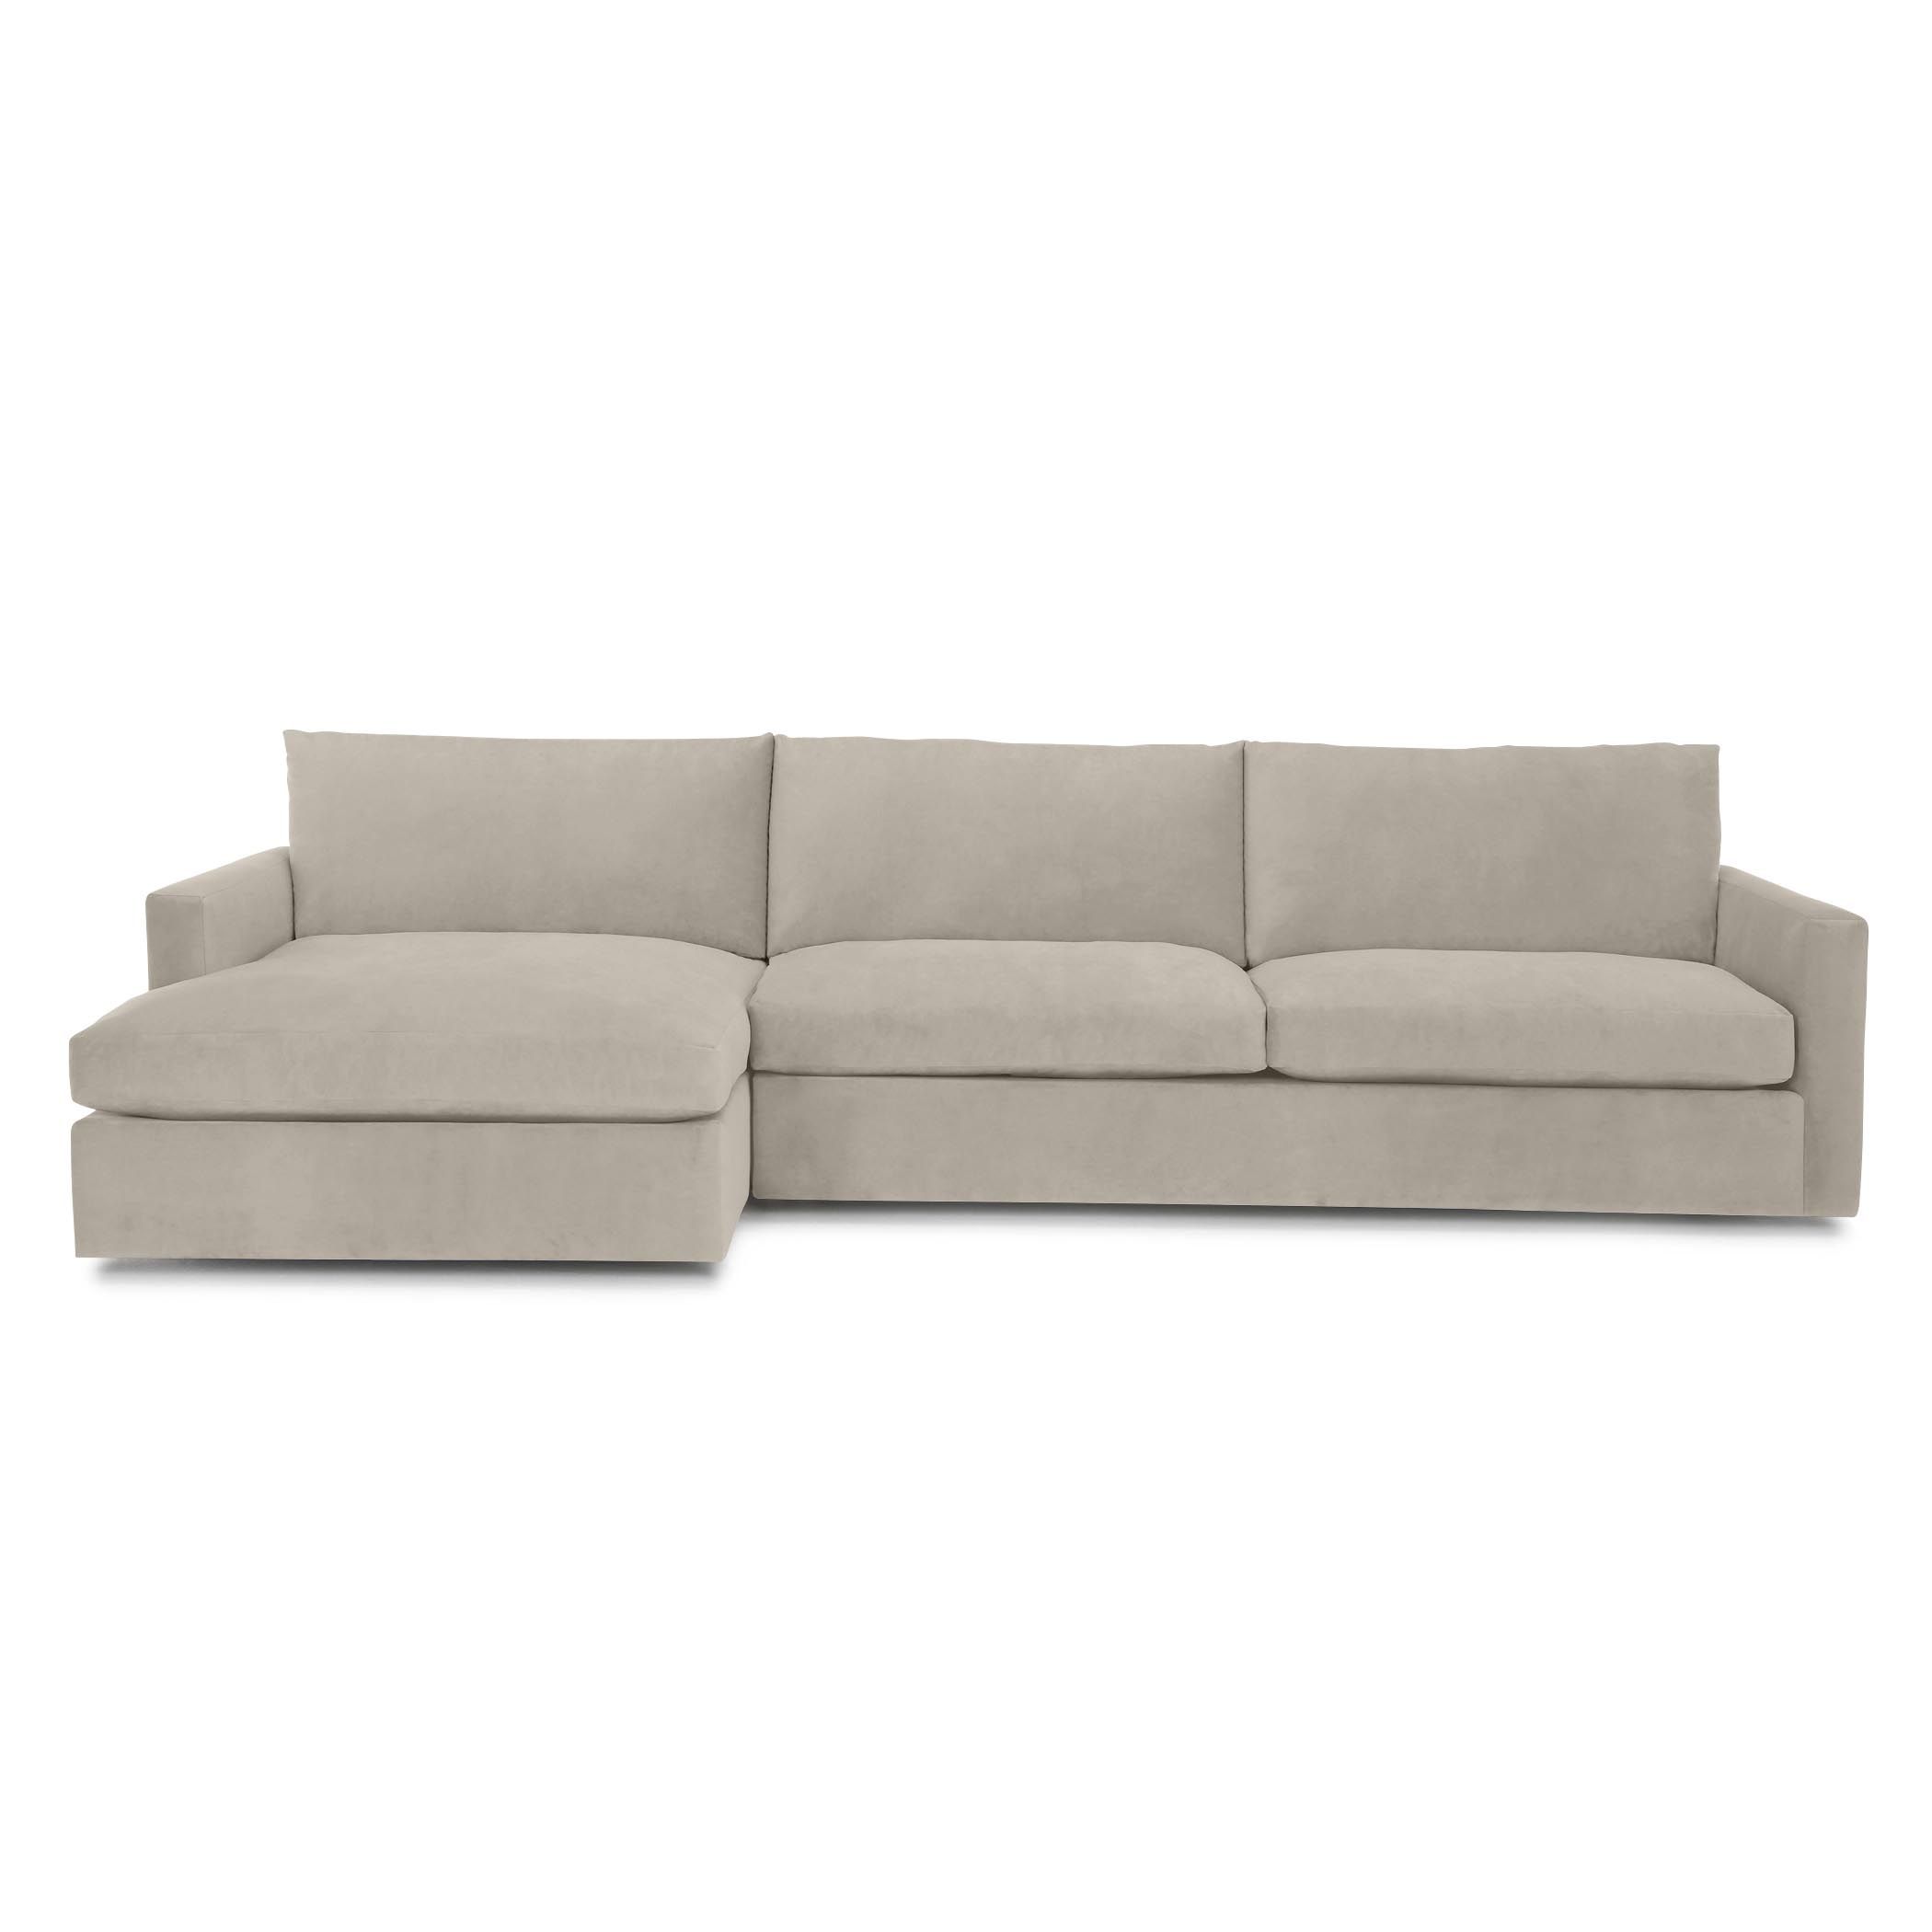 Ophelia Chaise Sectional - 2 PC | Z Gallerie